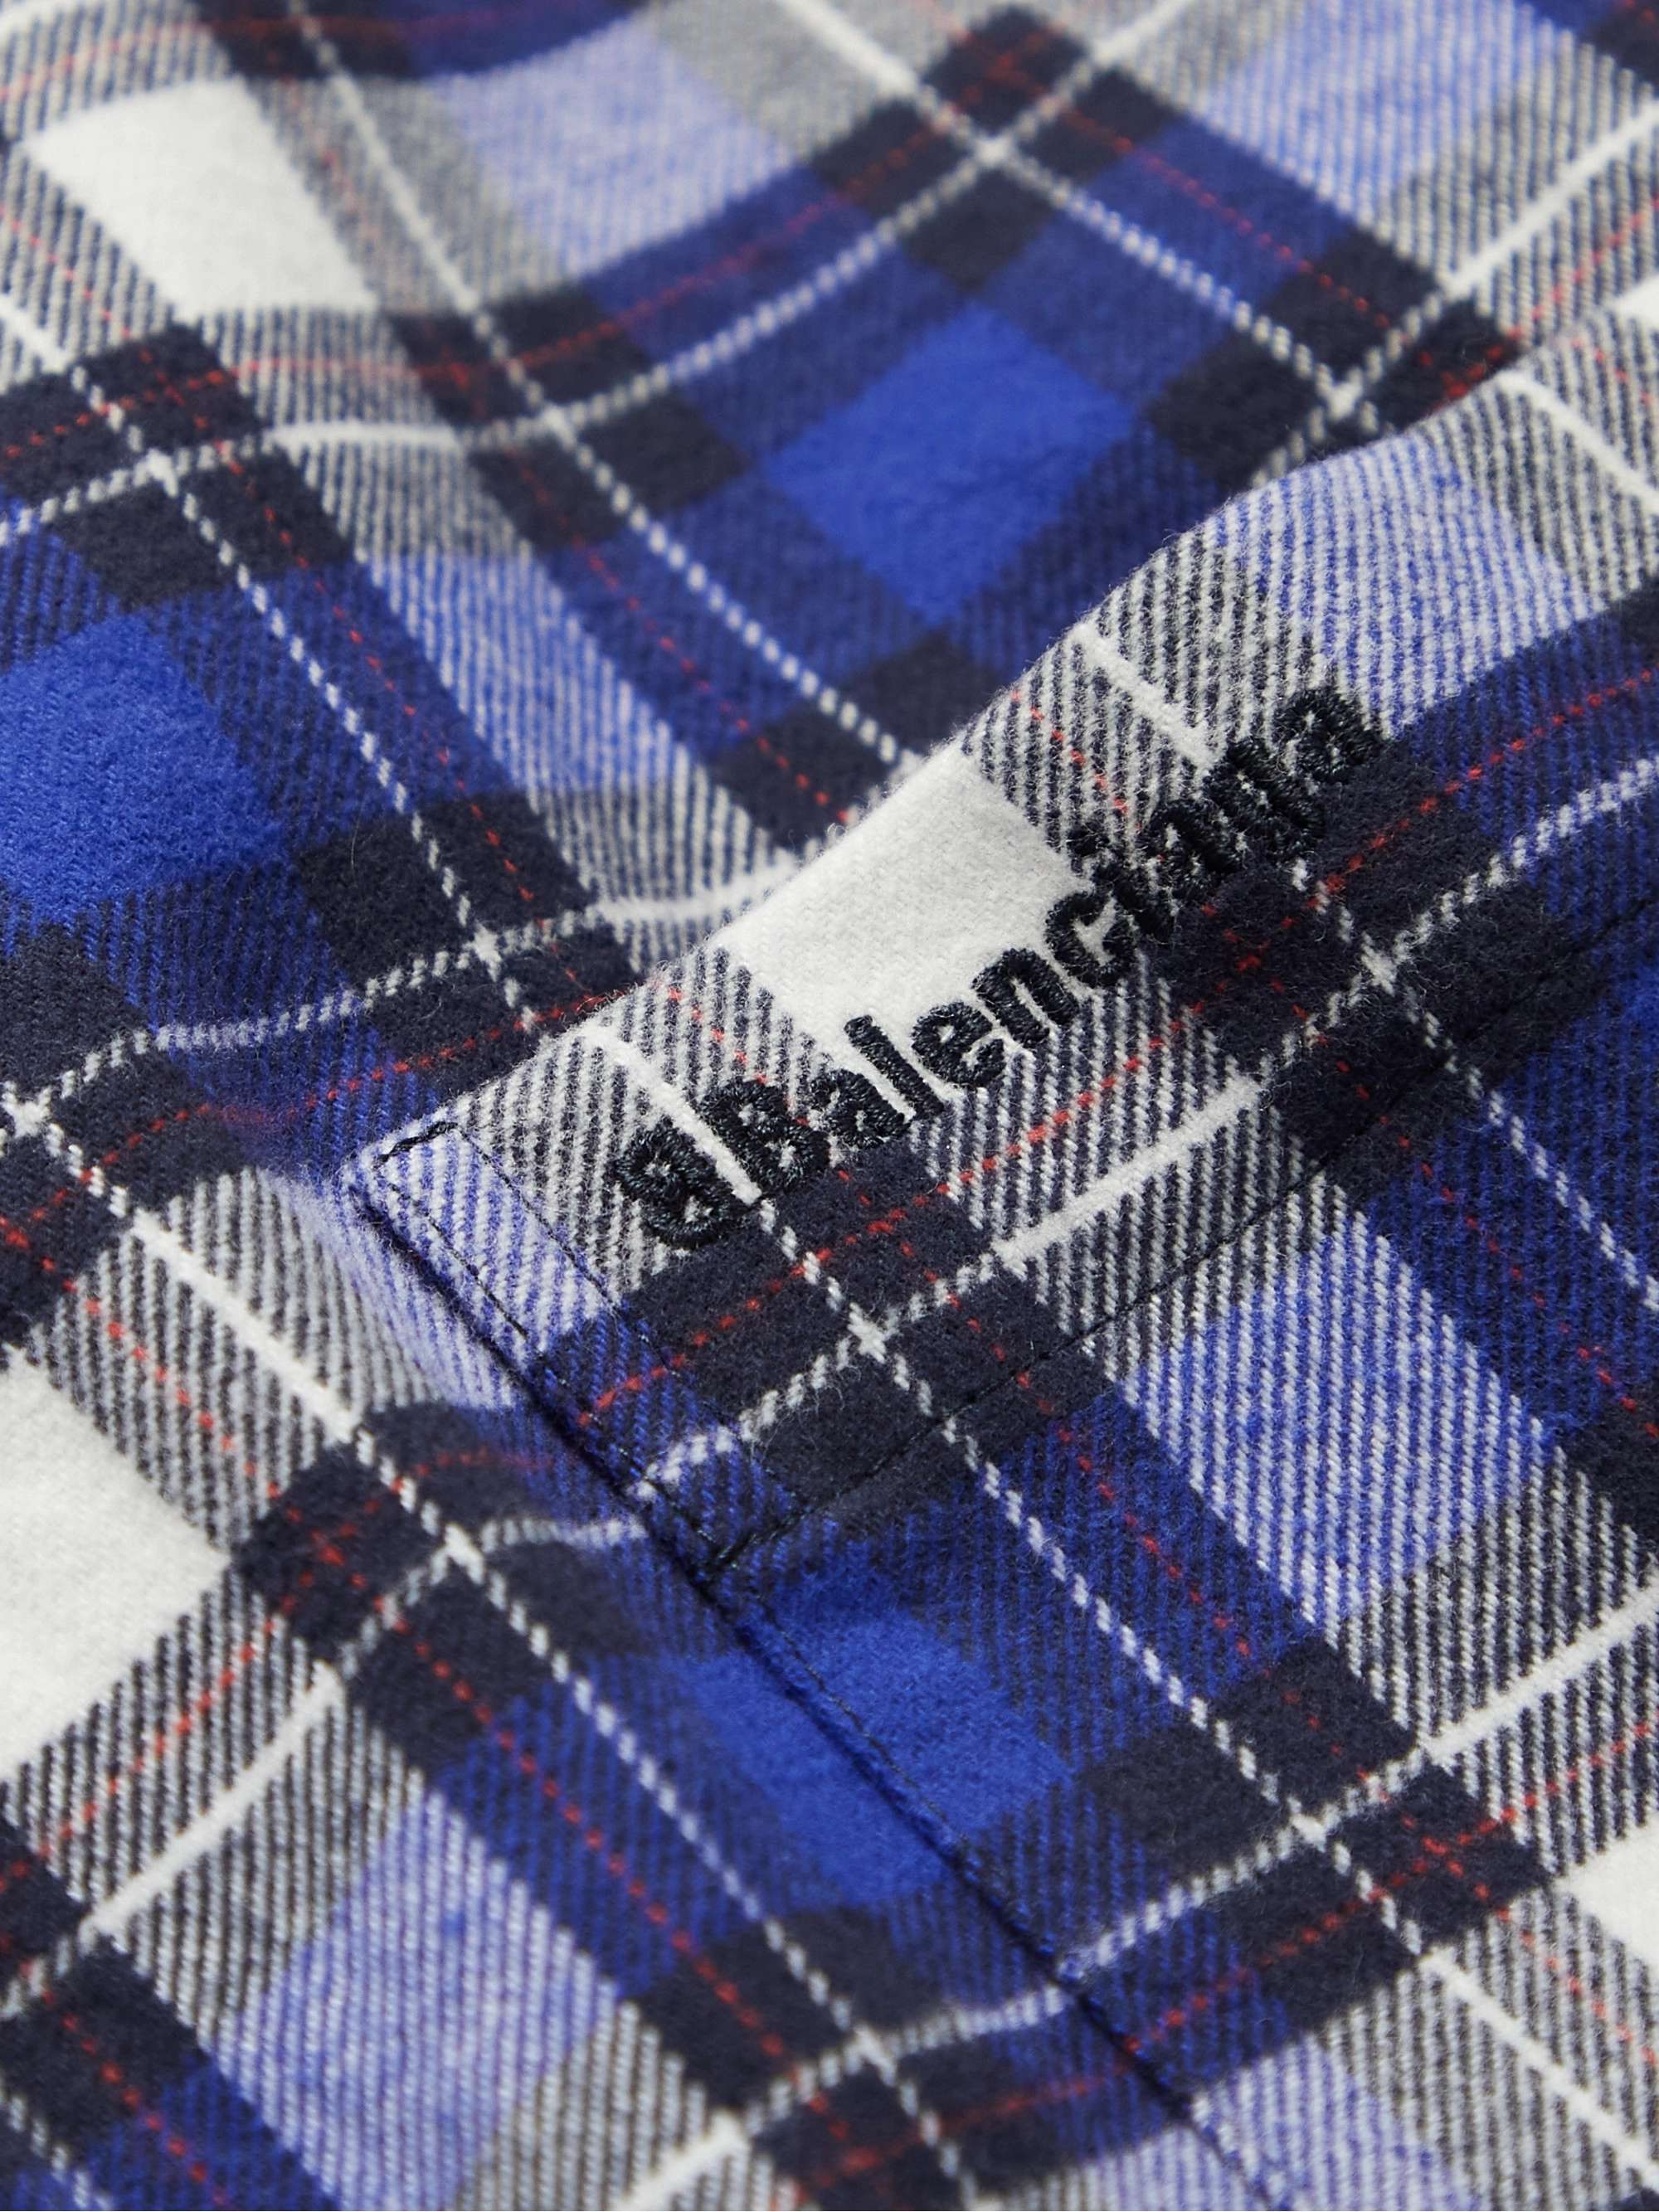 BALENCIAGA Padded Logo-Embroidered Checked Cotton-Flannel Overshirt